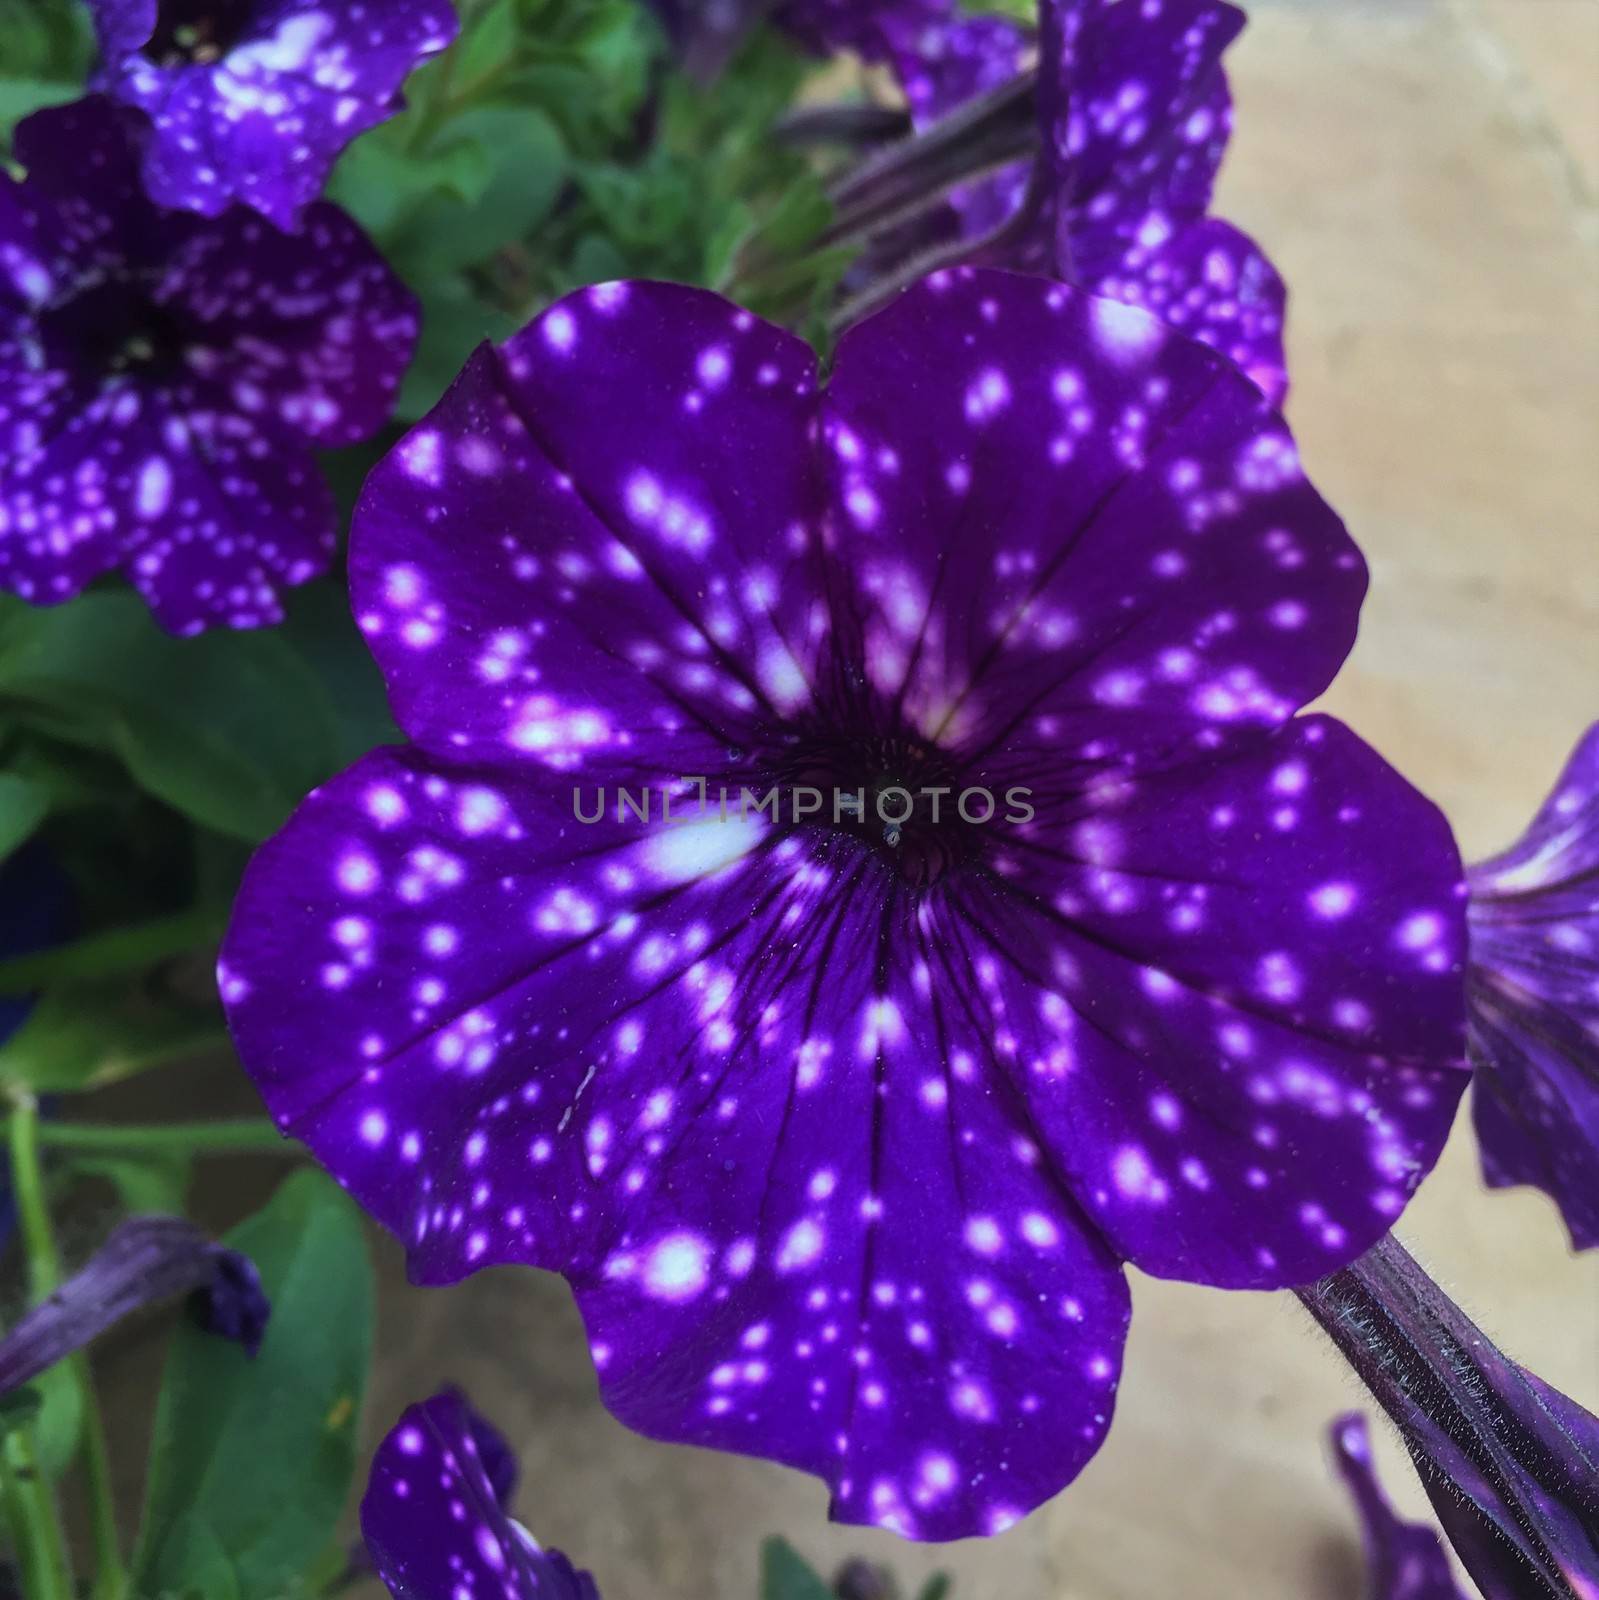 Galaxy Petunias in summer hanging baskets outdoors